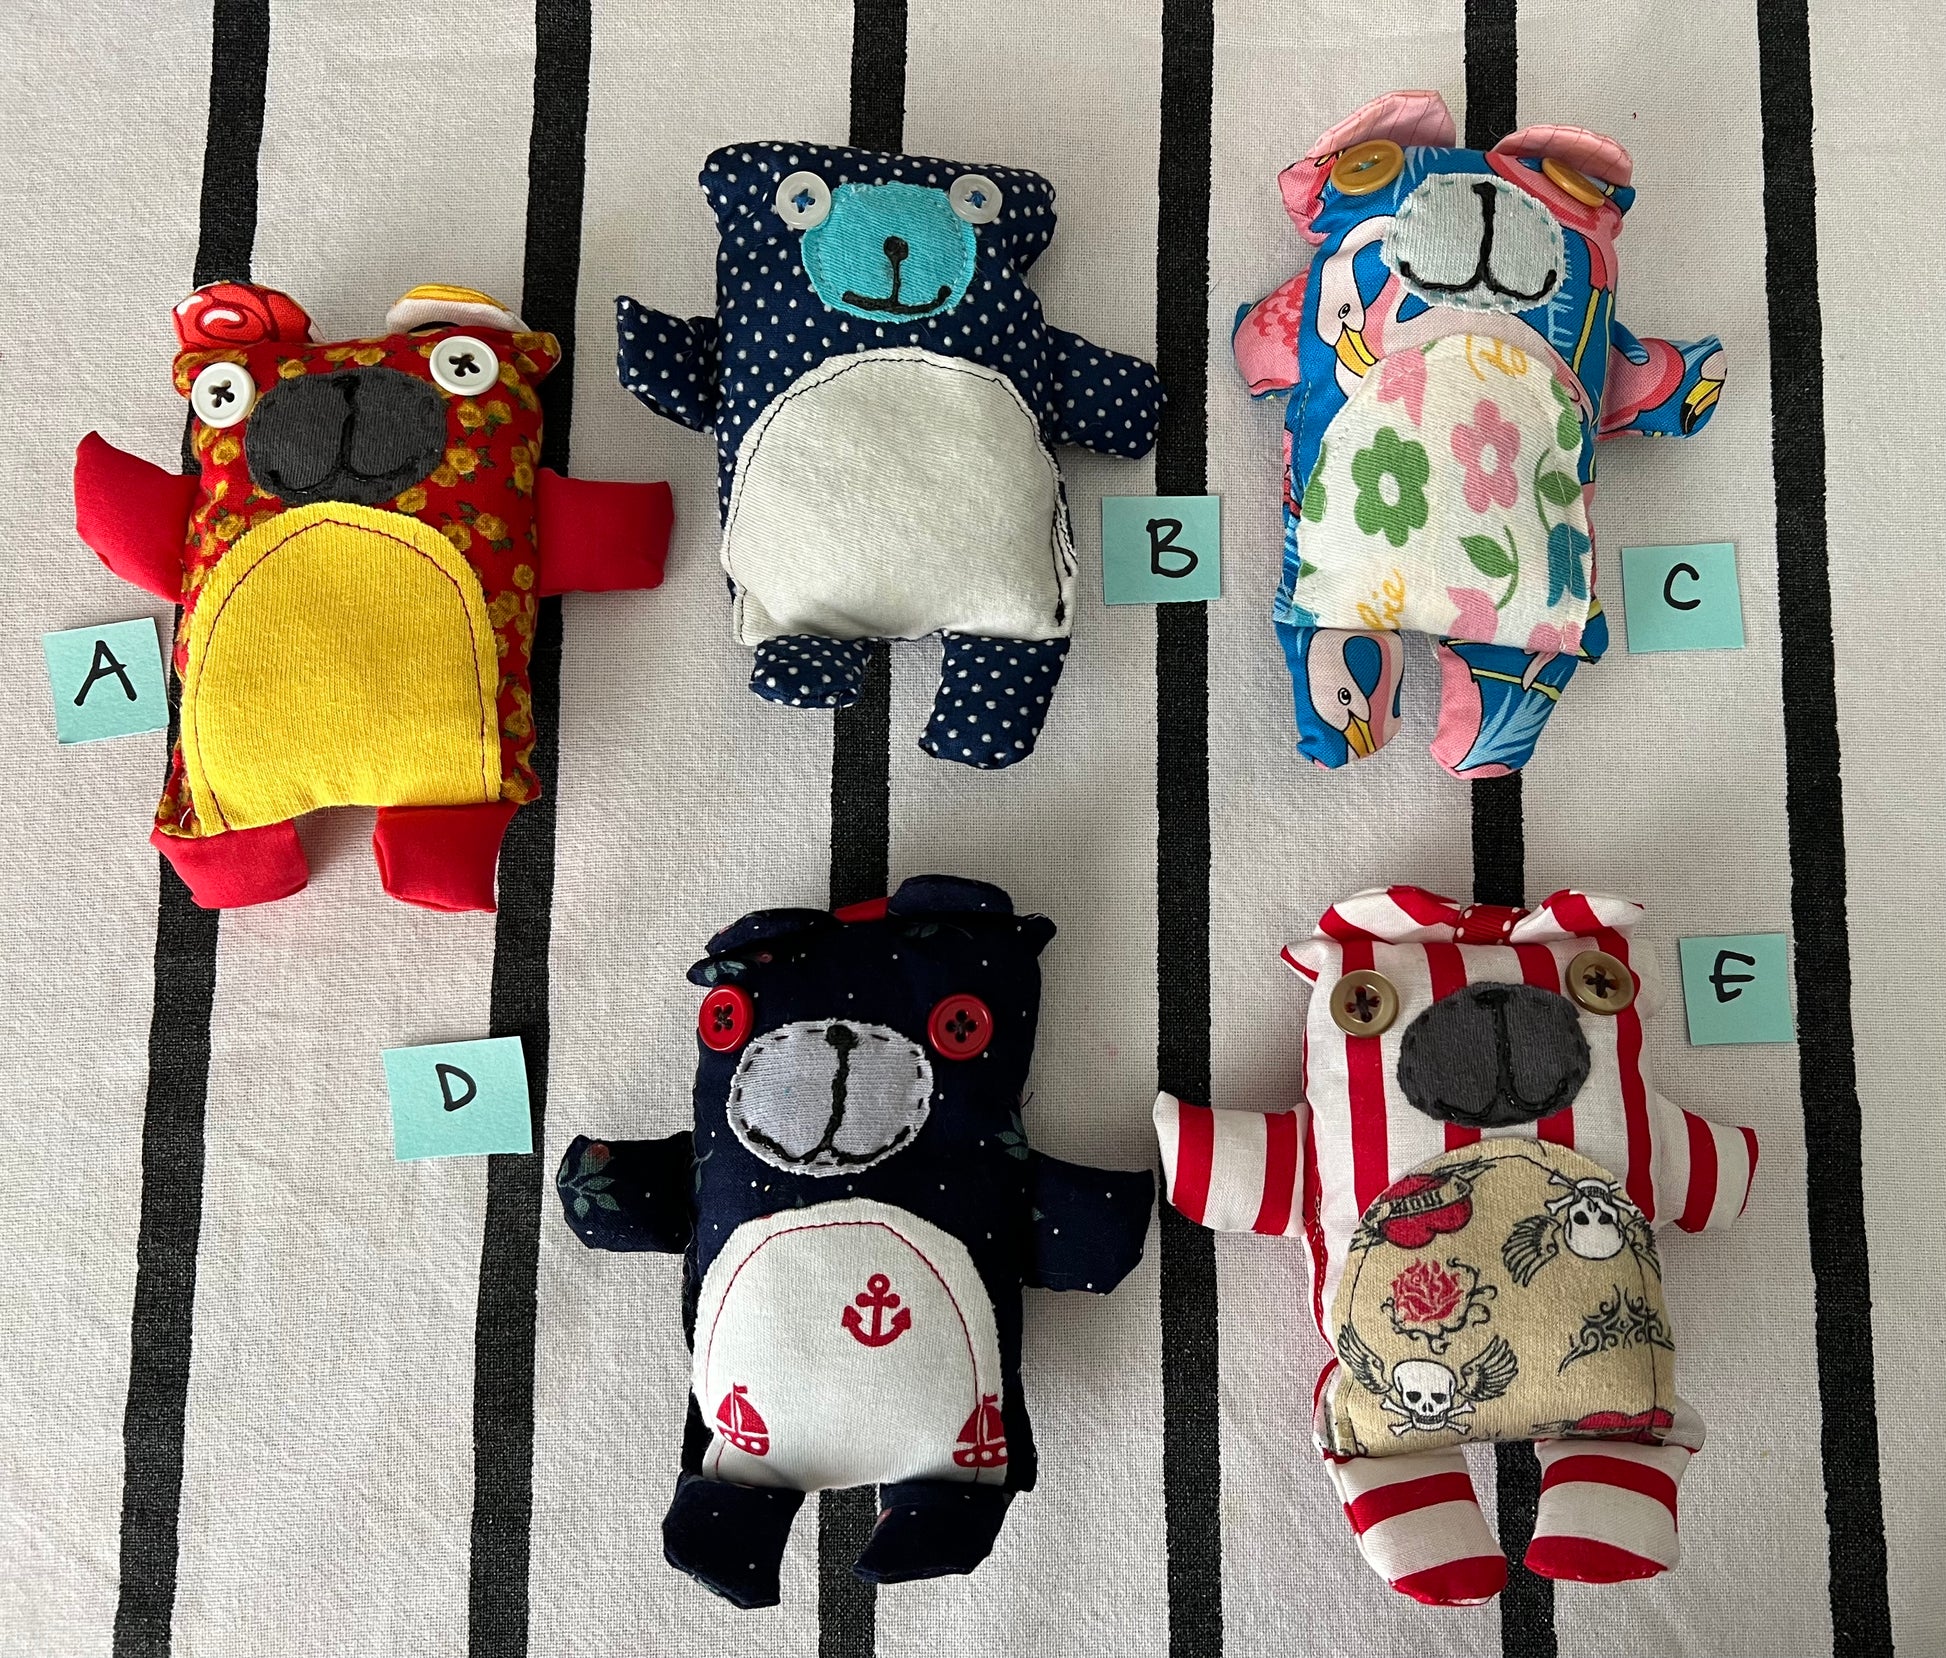 front view of mini animals with letters A B C D E next to each one.